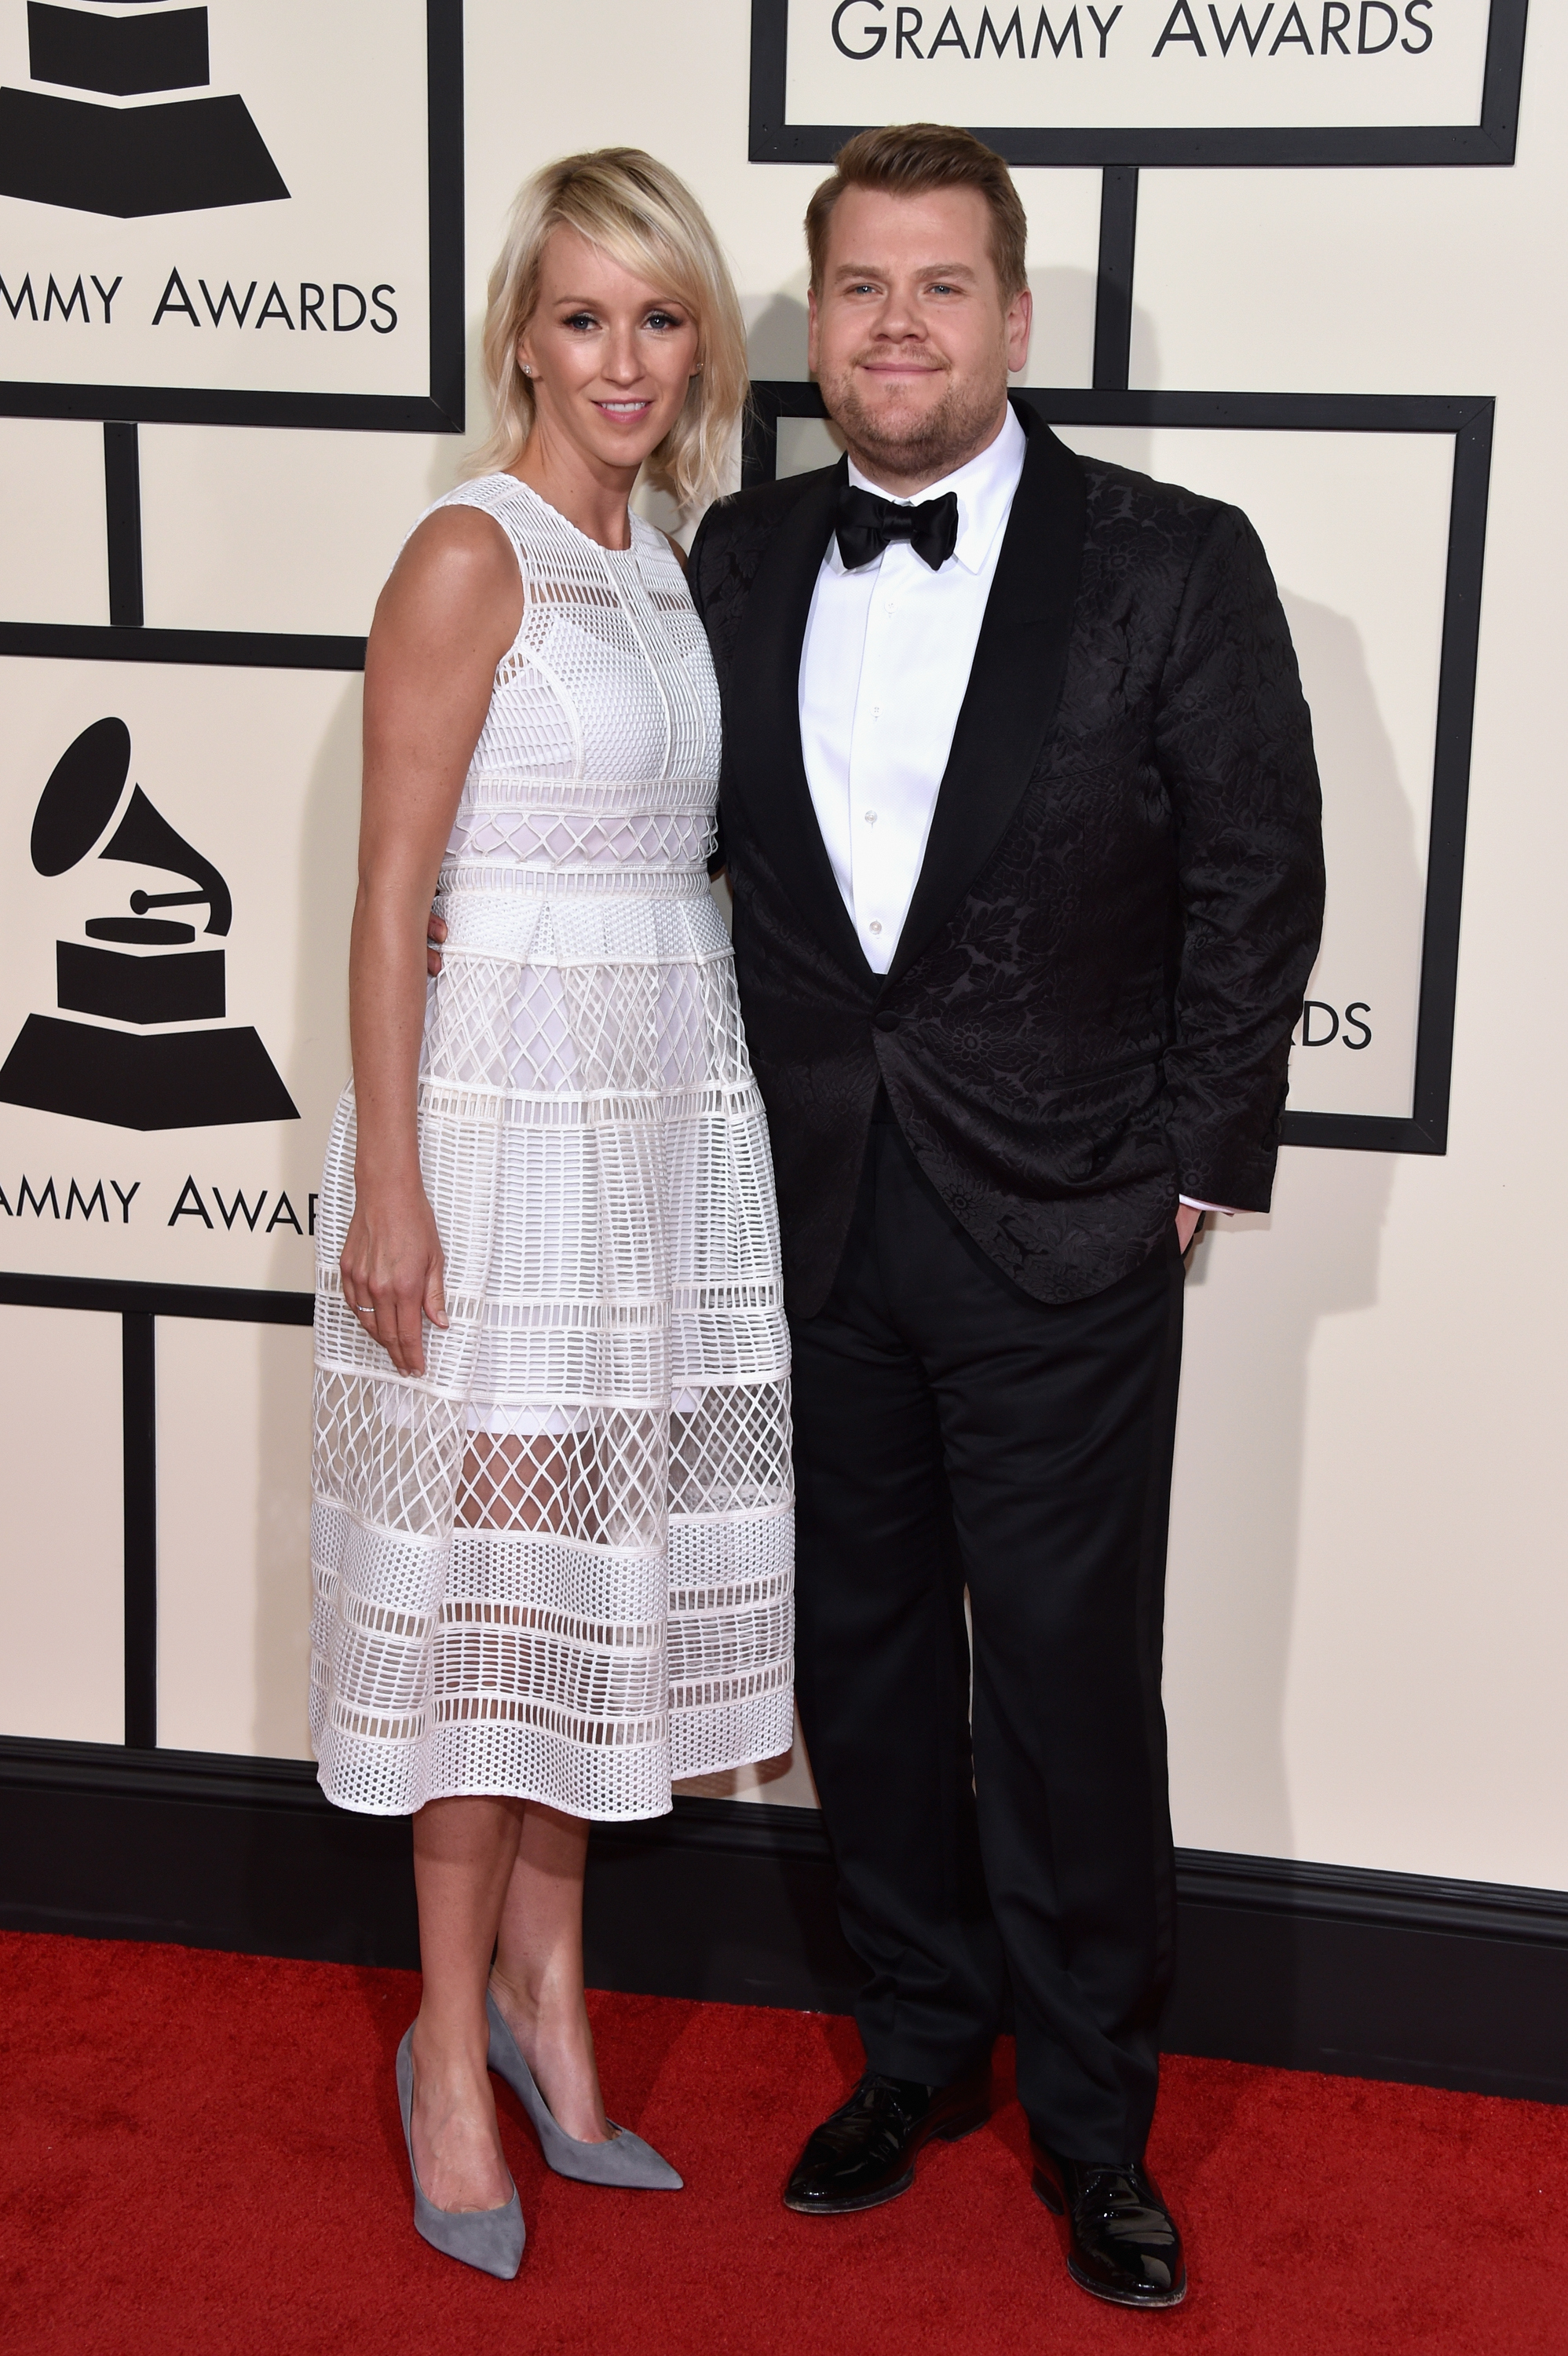 Julia Carey, left, and James Corden, right, attend the 58th GRAMMY Awards at Staples Center on Feb. 15, 2016 in Los Angeles.